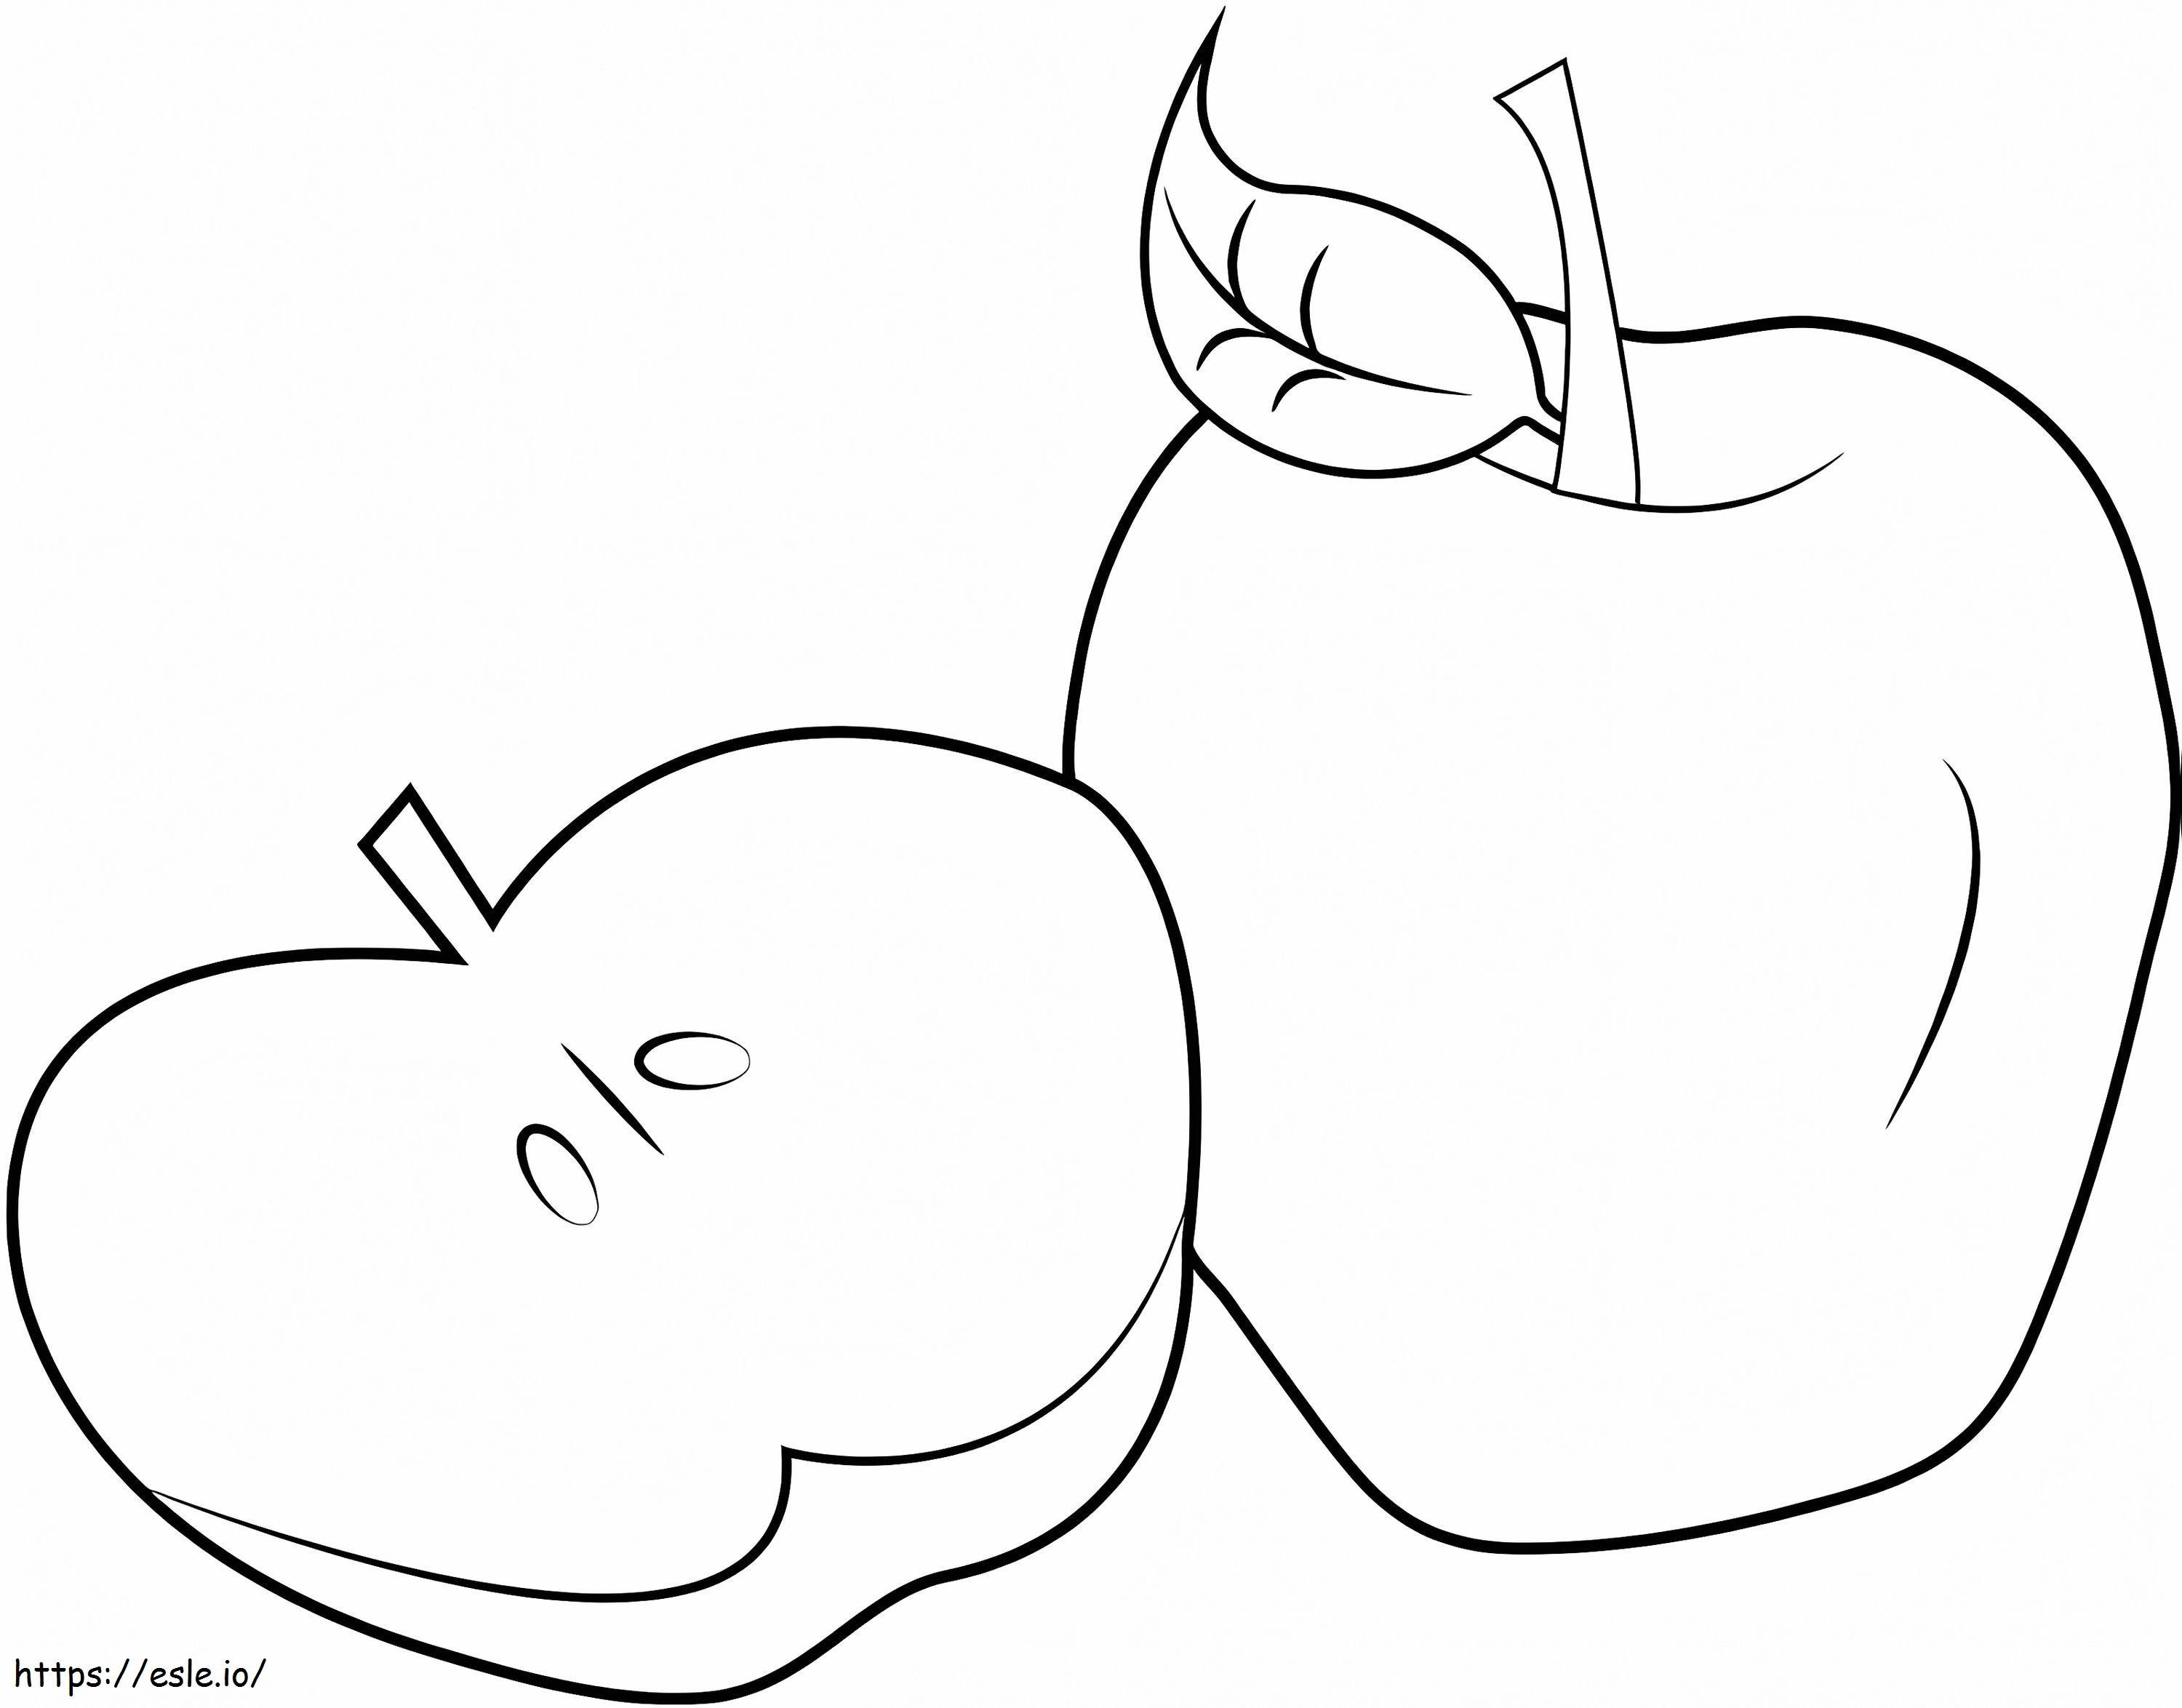 Sliced Apple And An Apple coloring page